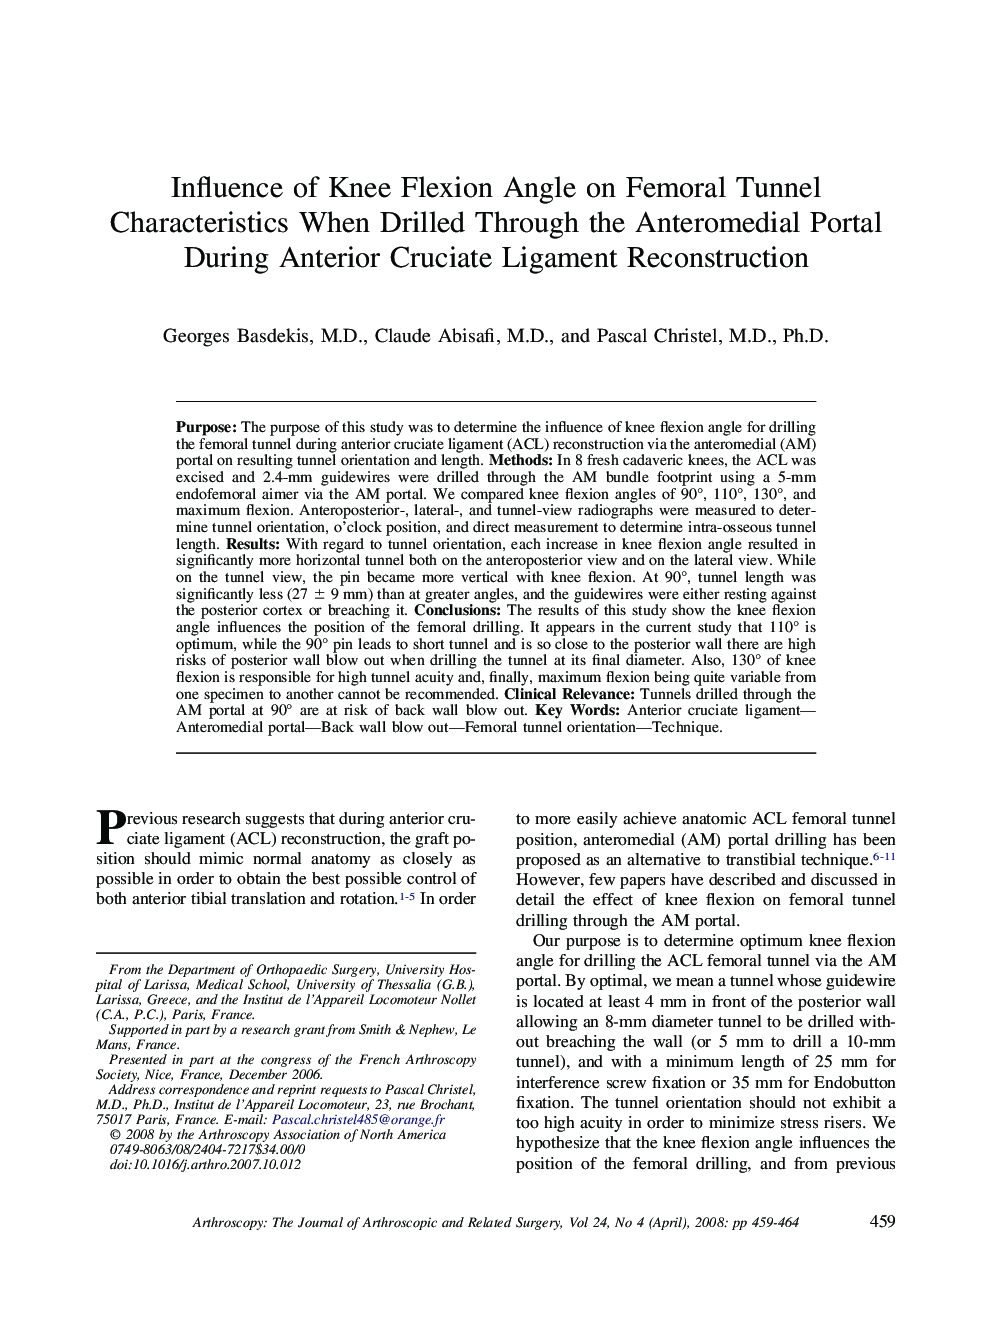 Influence of Knee Flexion Angle on Femoral Tunnel Characteristics When Drilled Through the Anteromedial Portal During Anterior Cruciate Ligament Reconstruction 